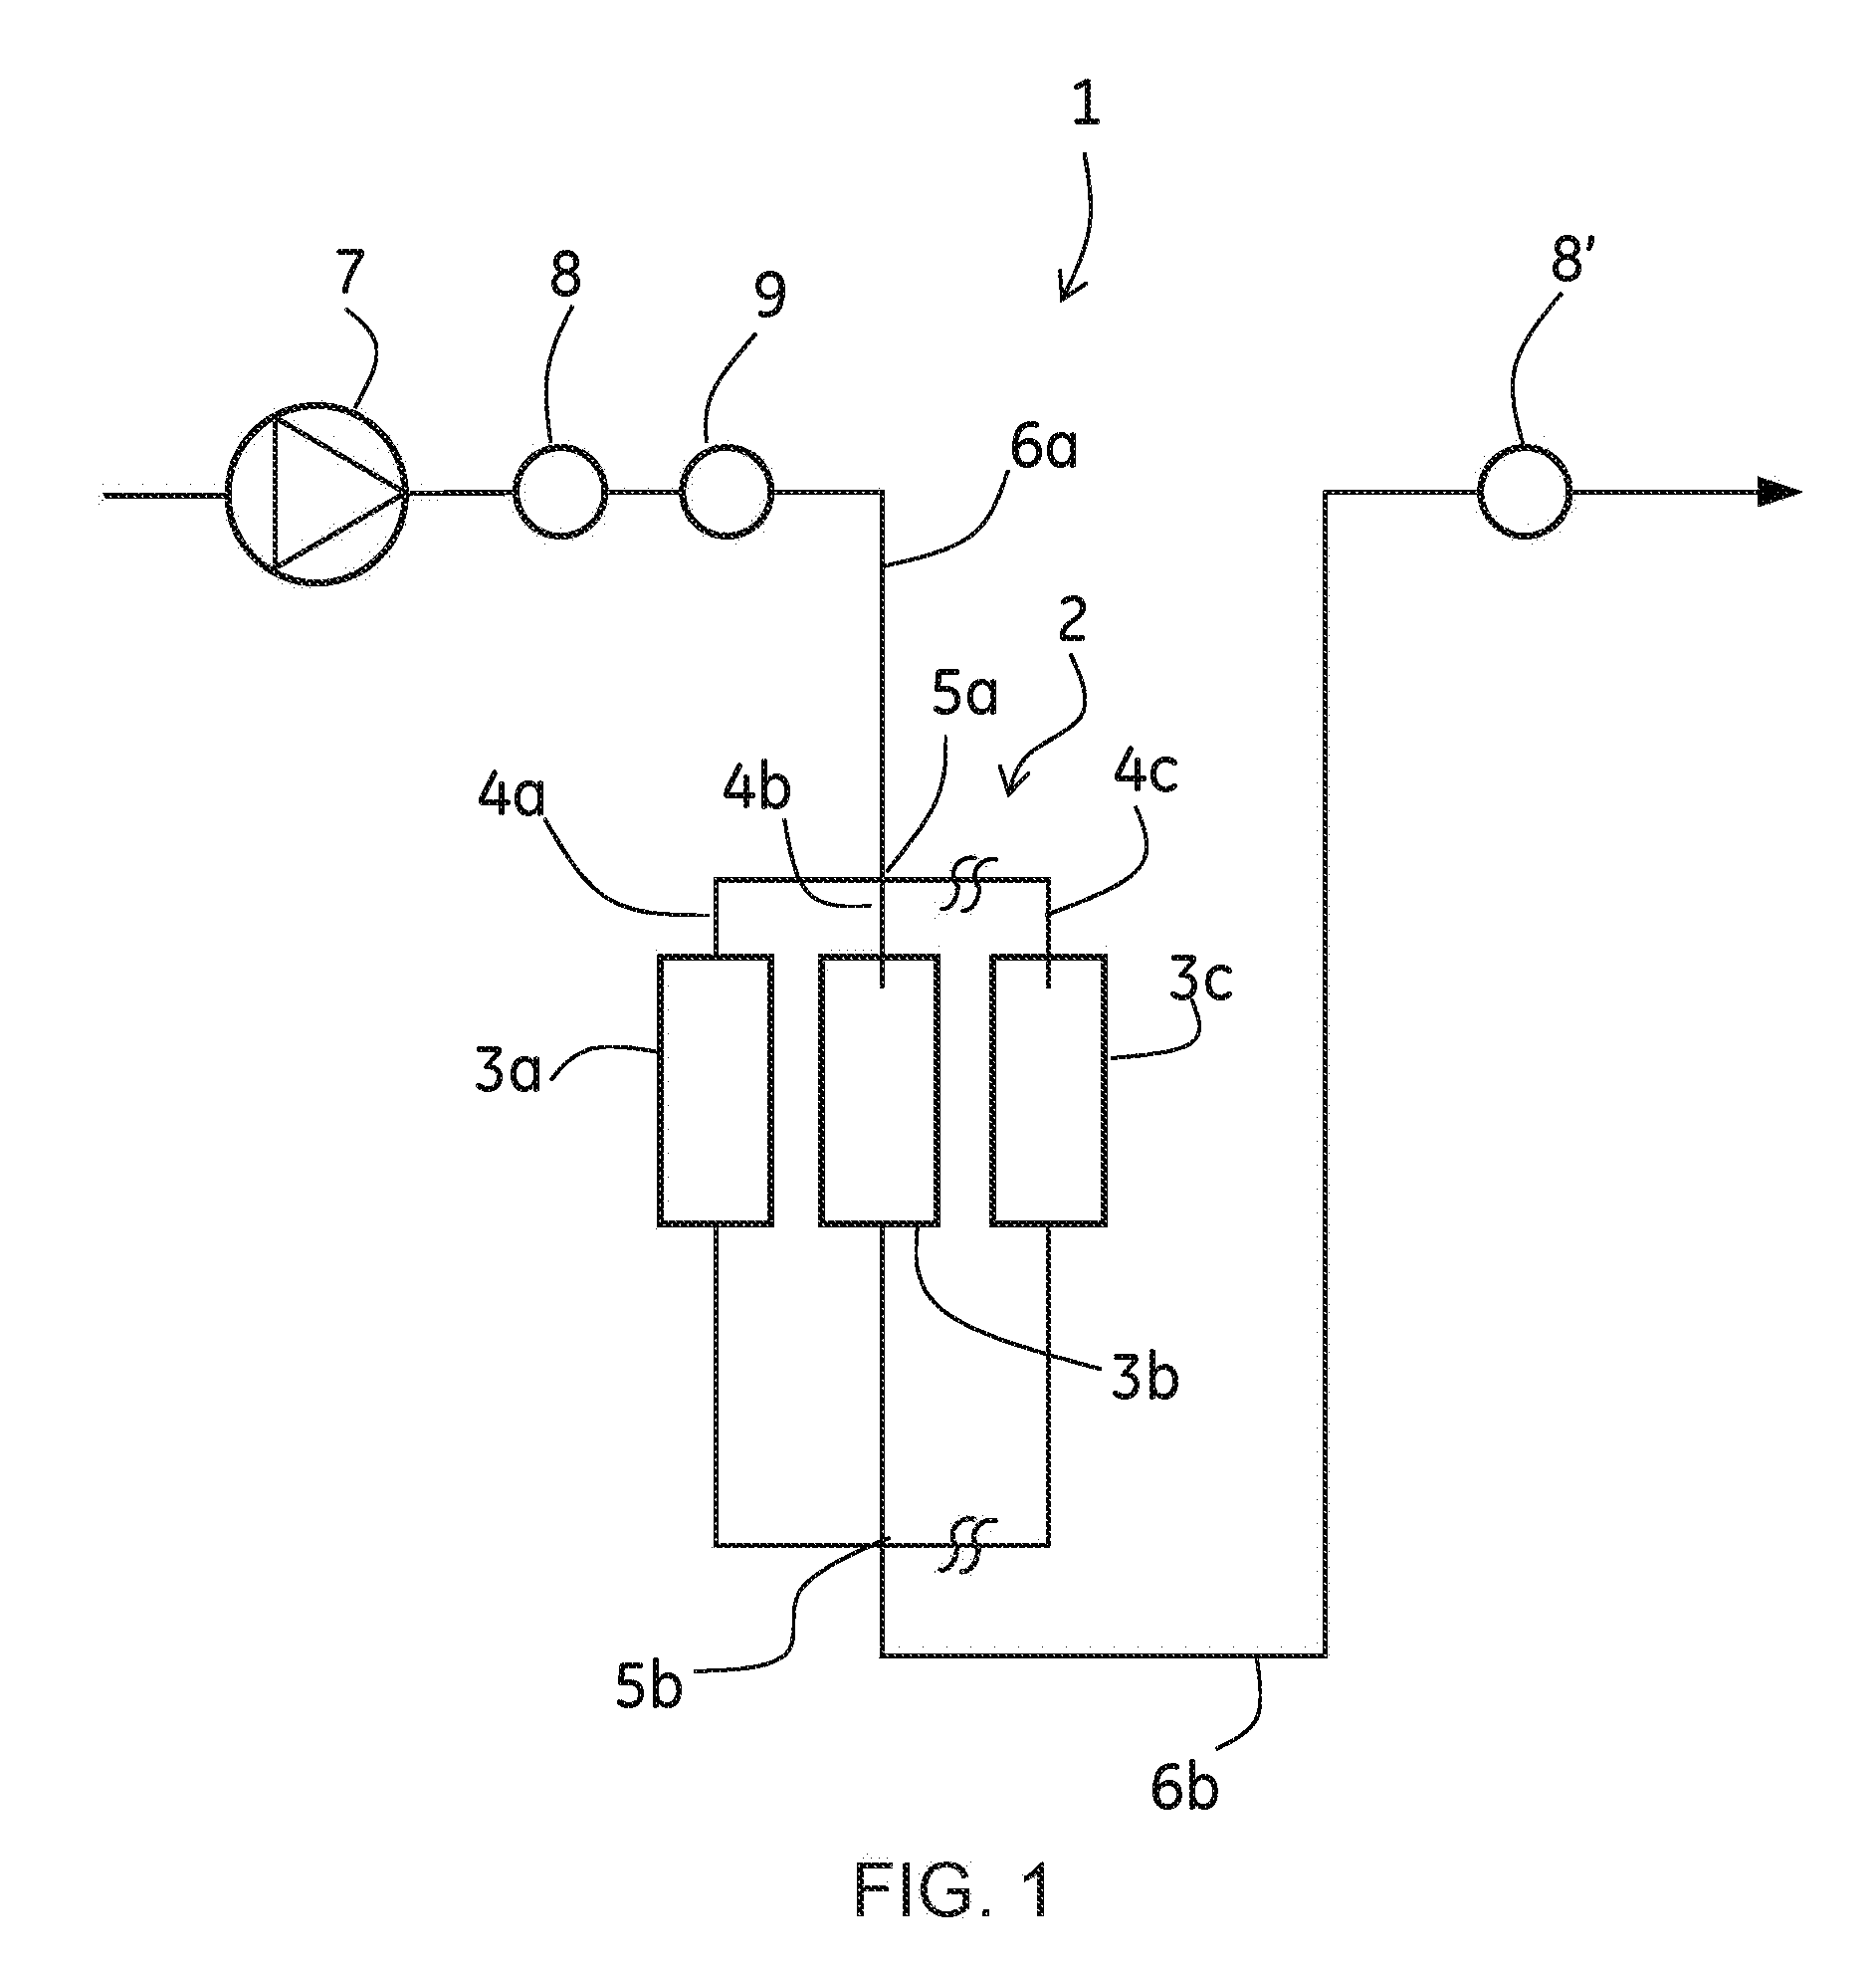 Parallel assembly of chromatography column modules